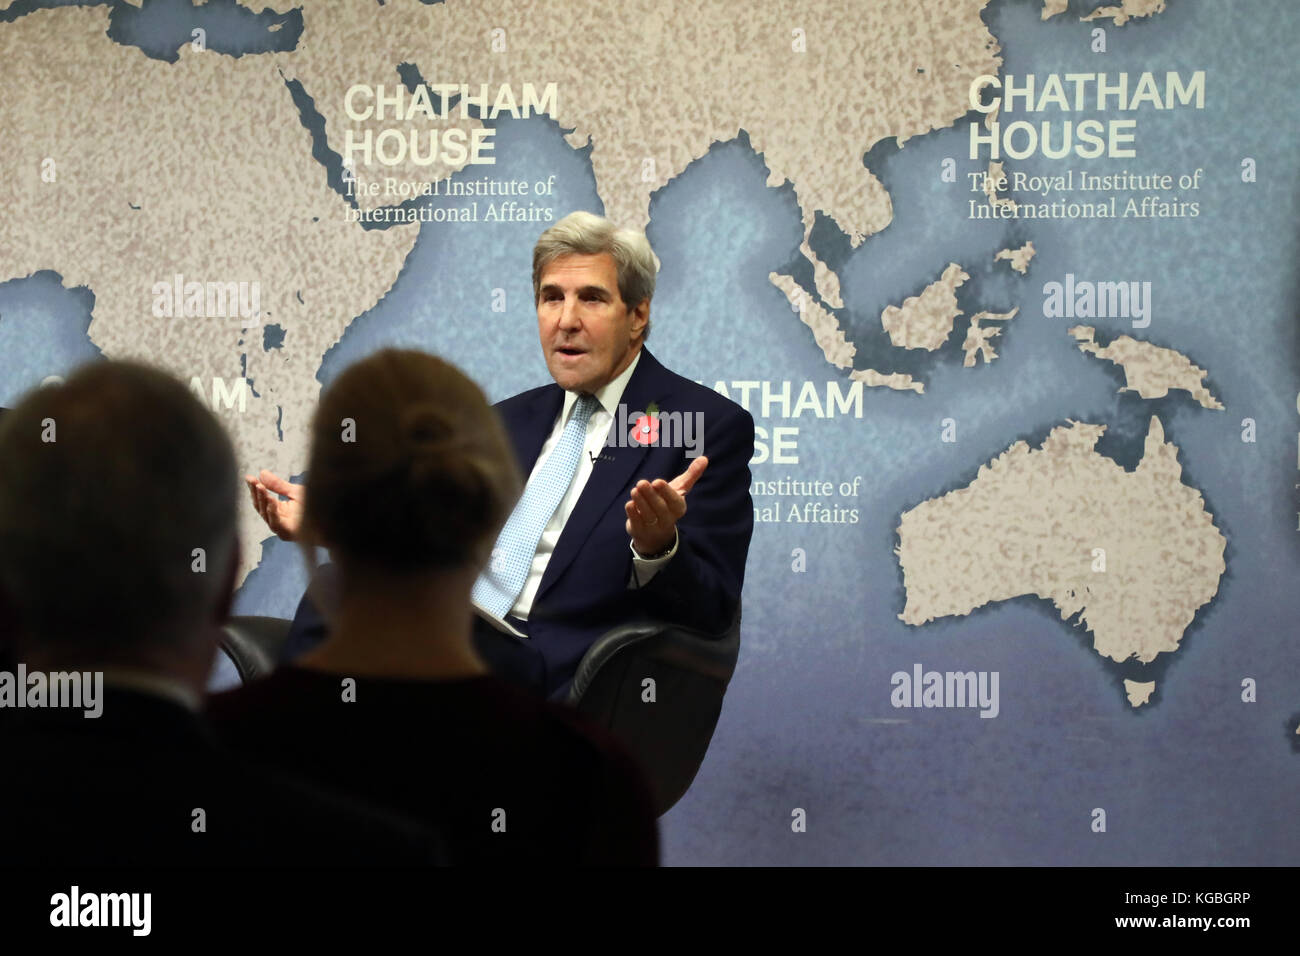 London, UK. 6th November, 2017. John Kerry, former US secretary of state, speaking about the Iranian nuclear deal at the Chatham House think-tank in London on 6 November, 2017. Kerry strongly defended the deal and sharply criticised President Donald Trump for refusing to recertify it in October. Credit: Dominic Dudley/Alamy Live News Stock Photo